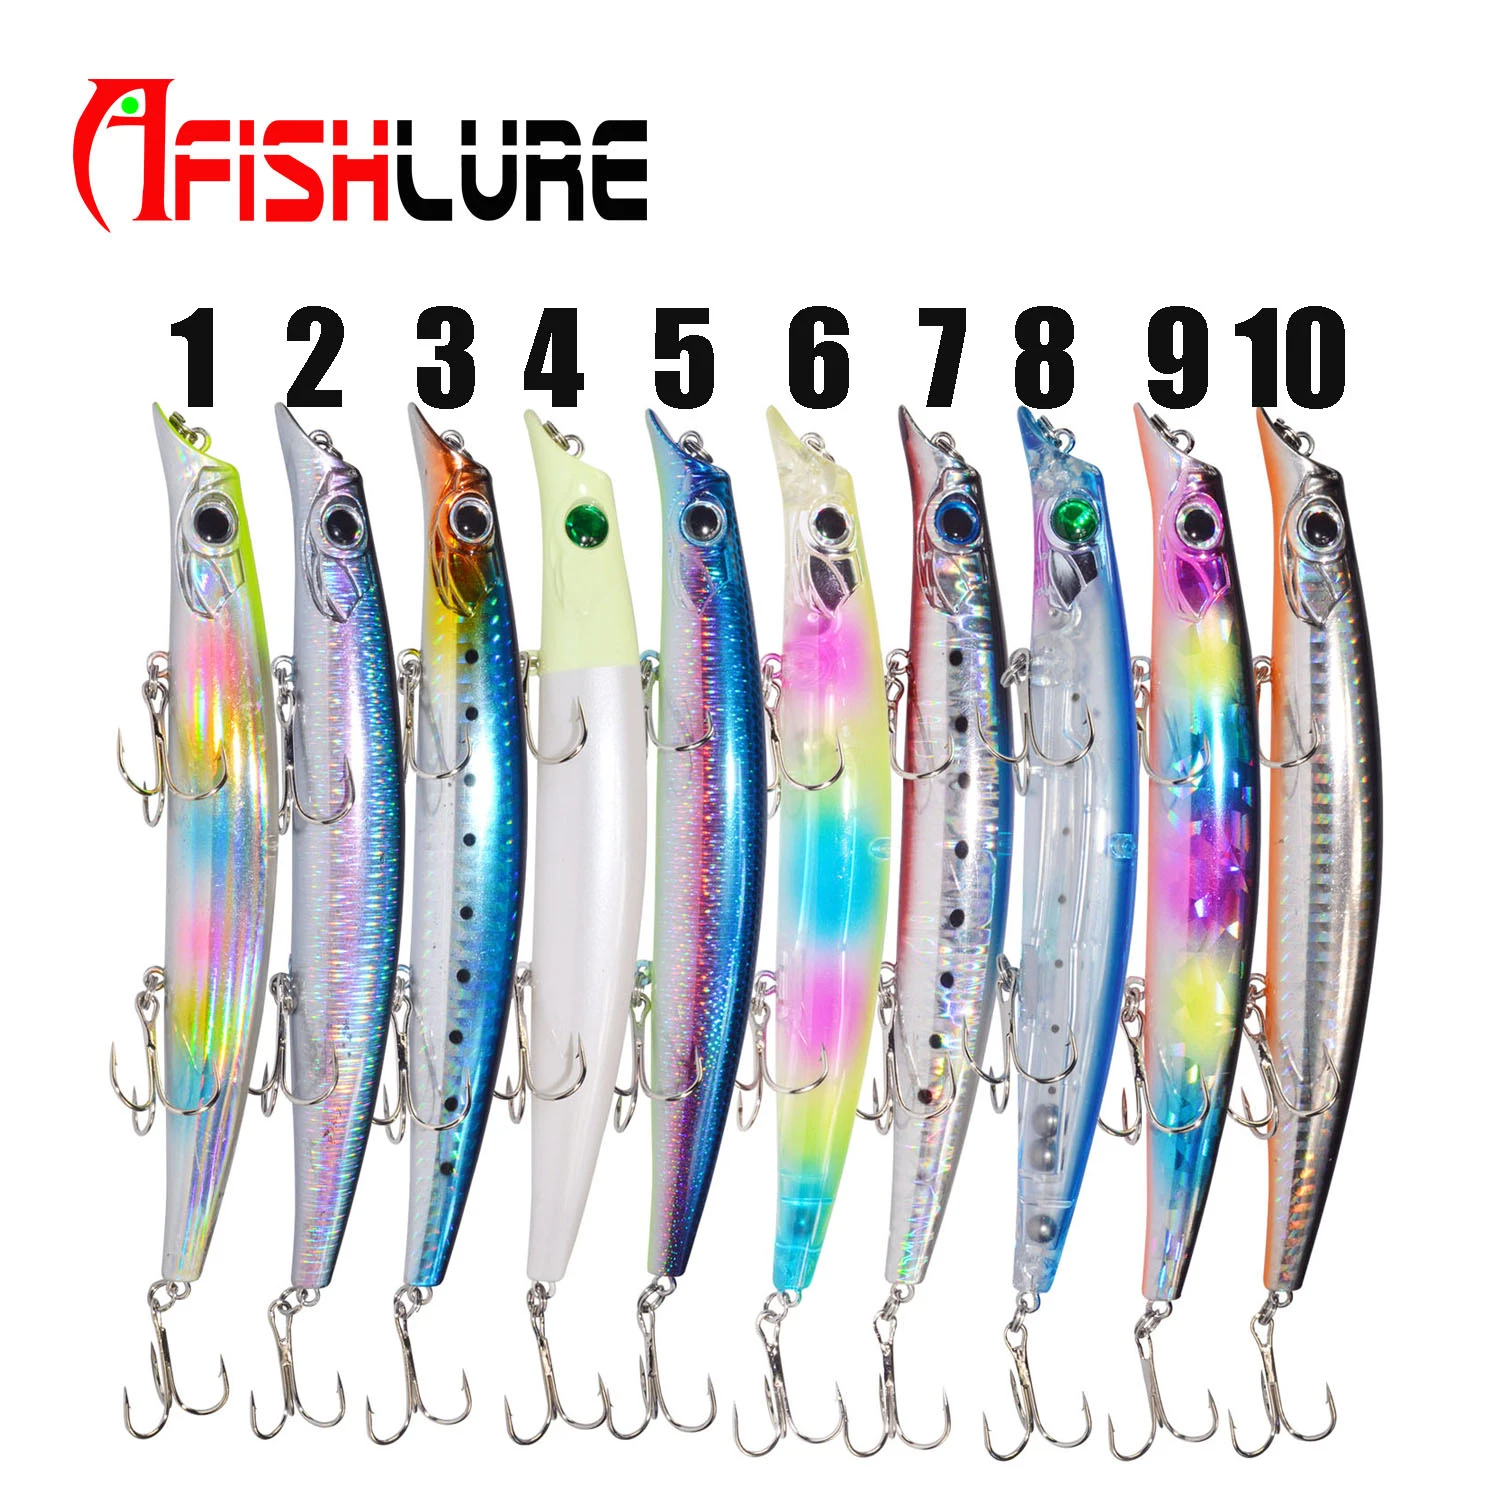 Top Water Popper Bait 18g 145mm Afishlure Artificial Hard Fishing Lures StickBaits Swimming Fishing Baits  cheap bass fishing